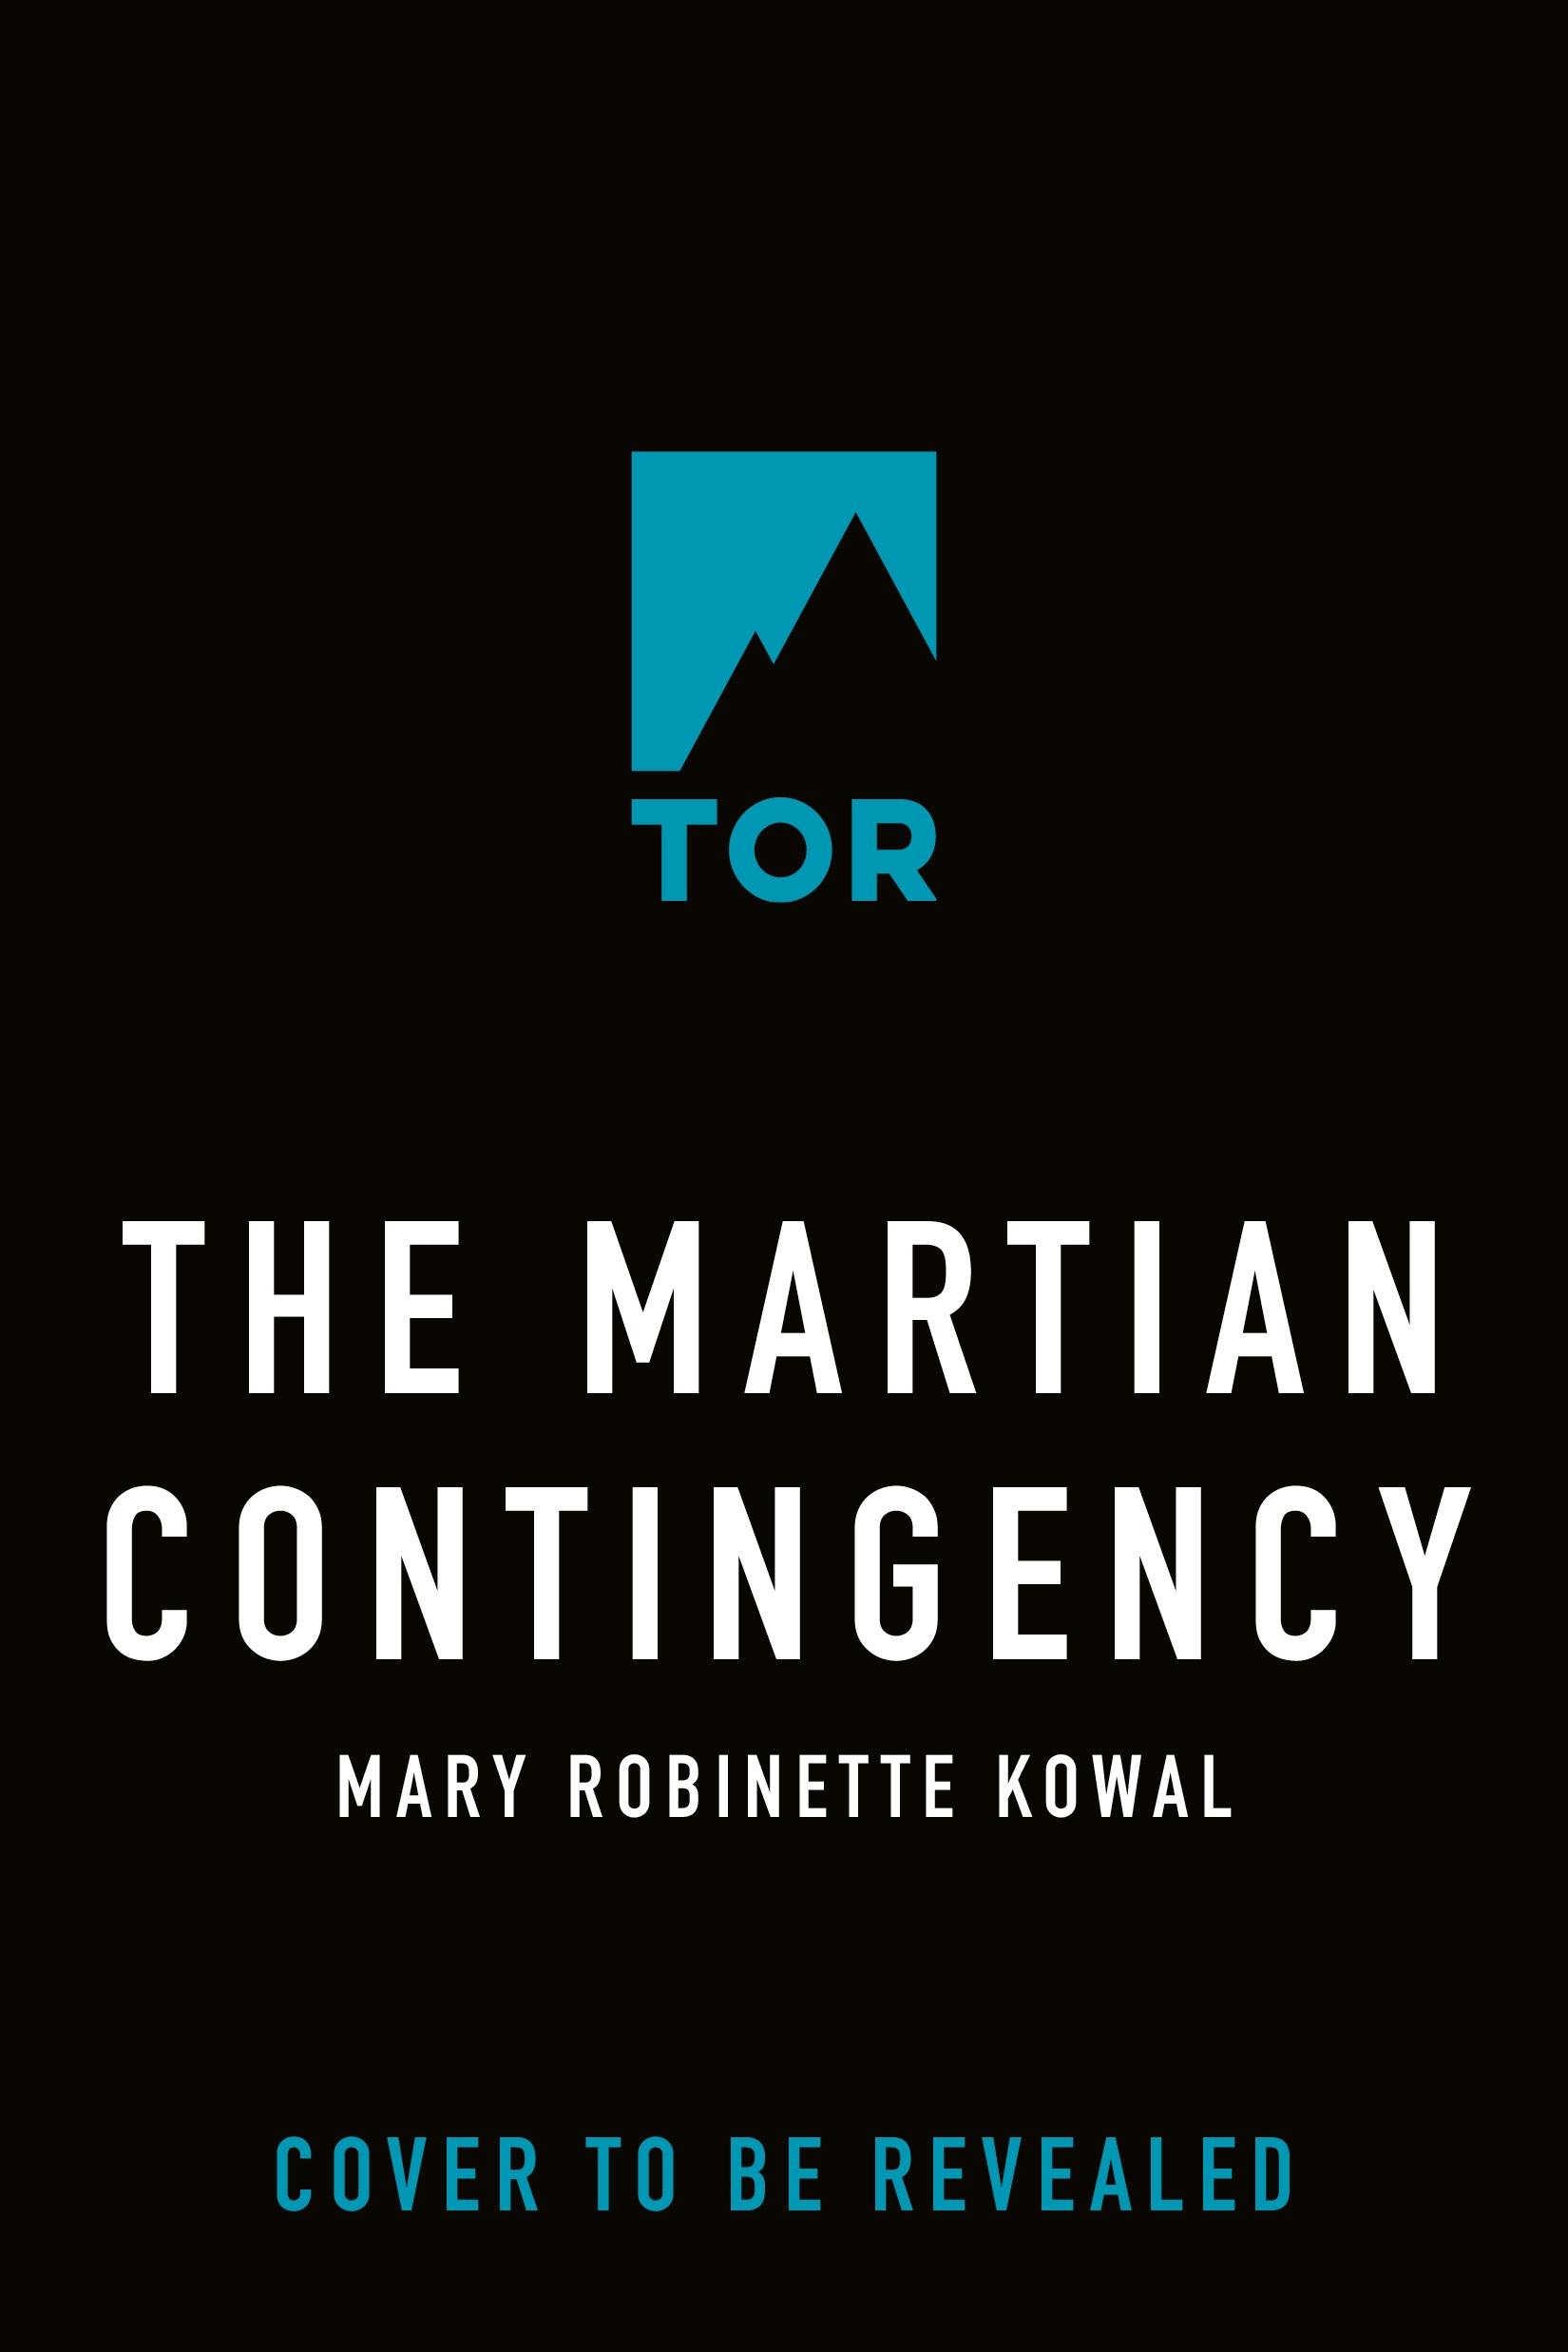 The Martian Contingency